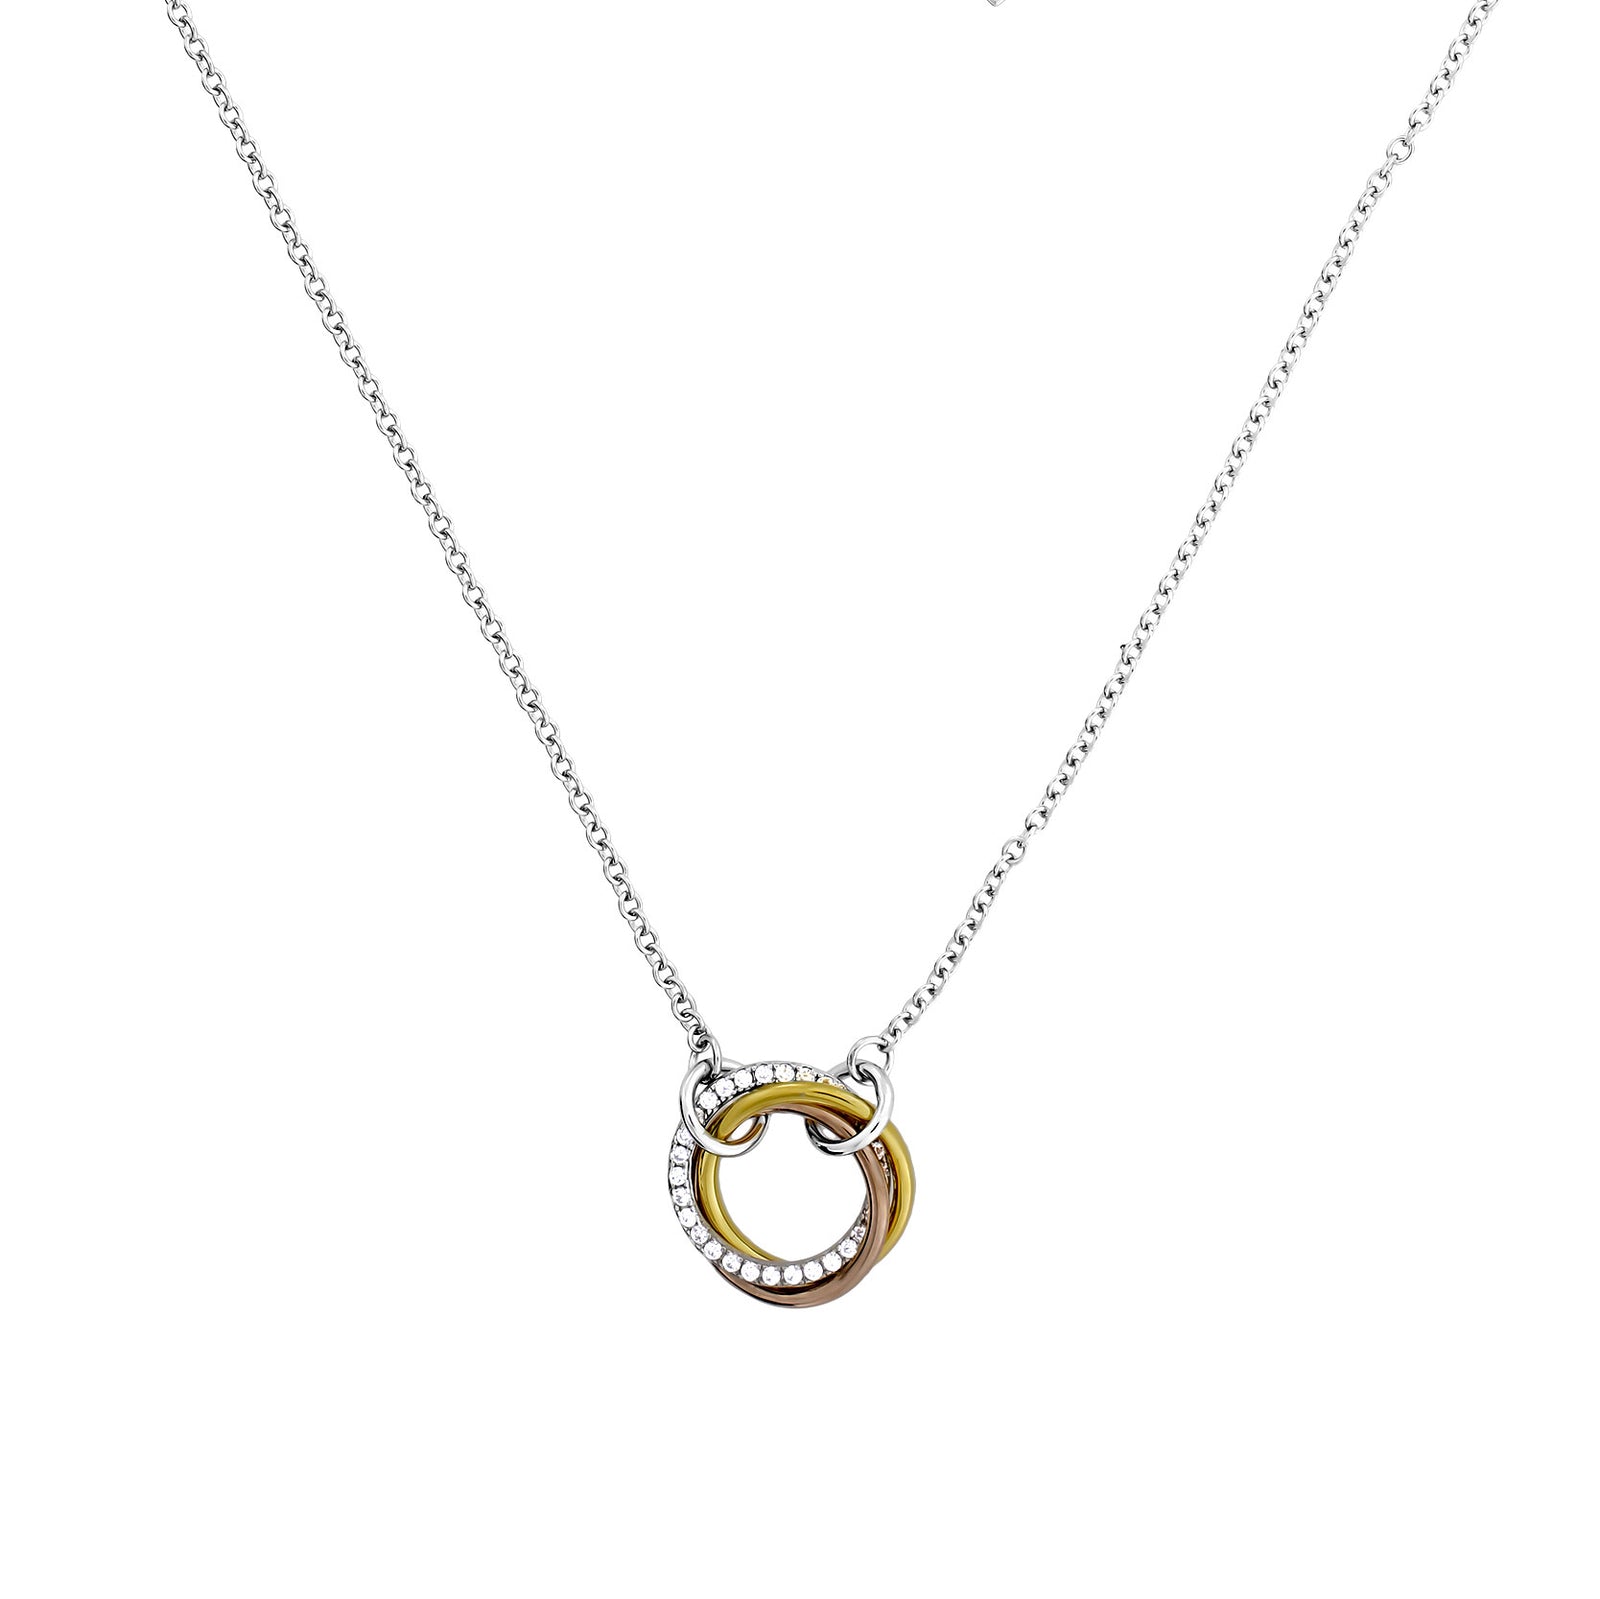 Entangled Love Knot Necklace - With Pavé